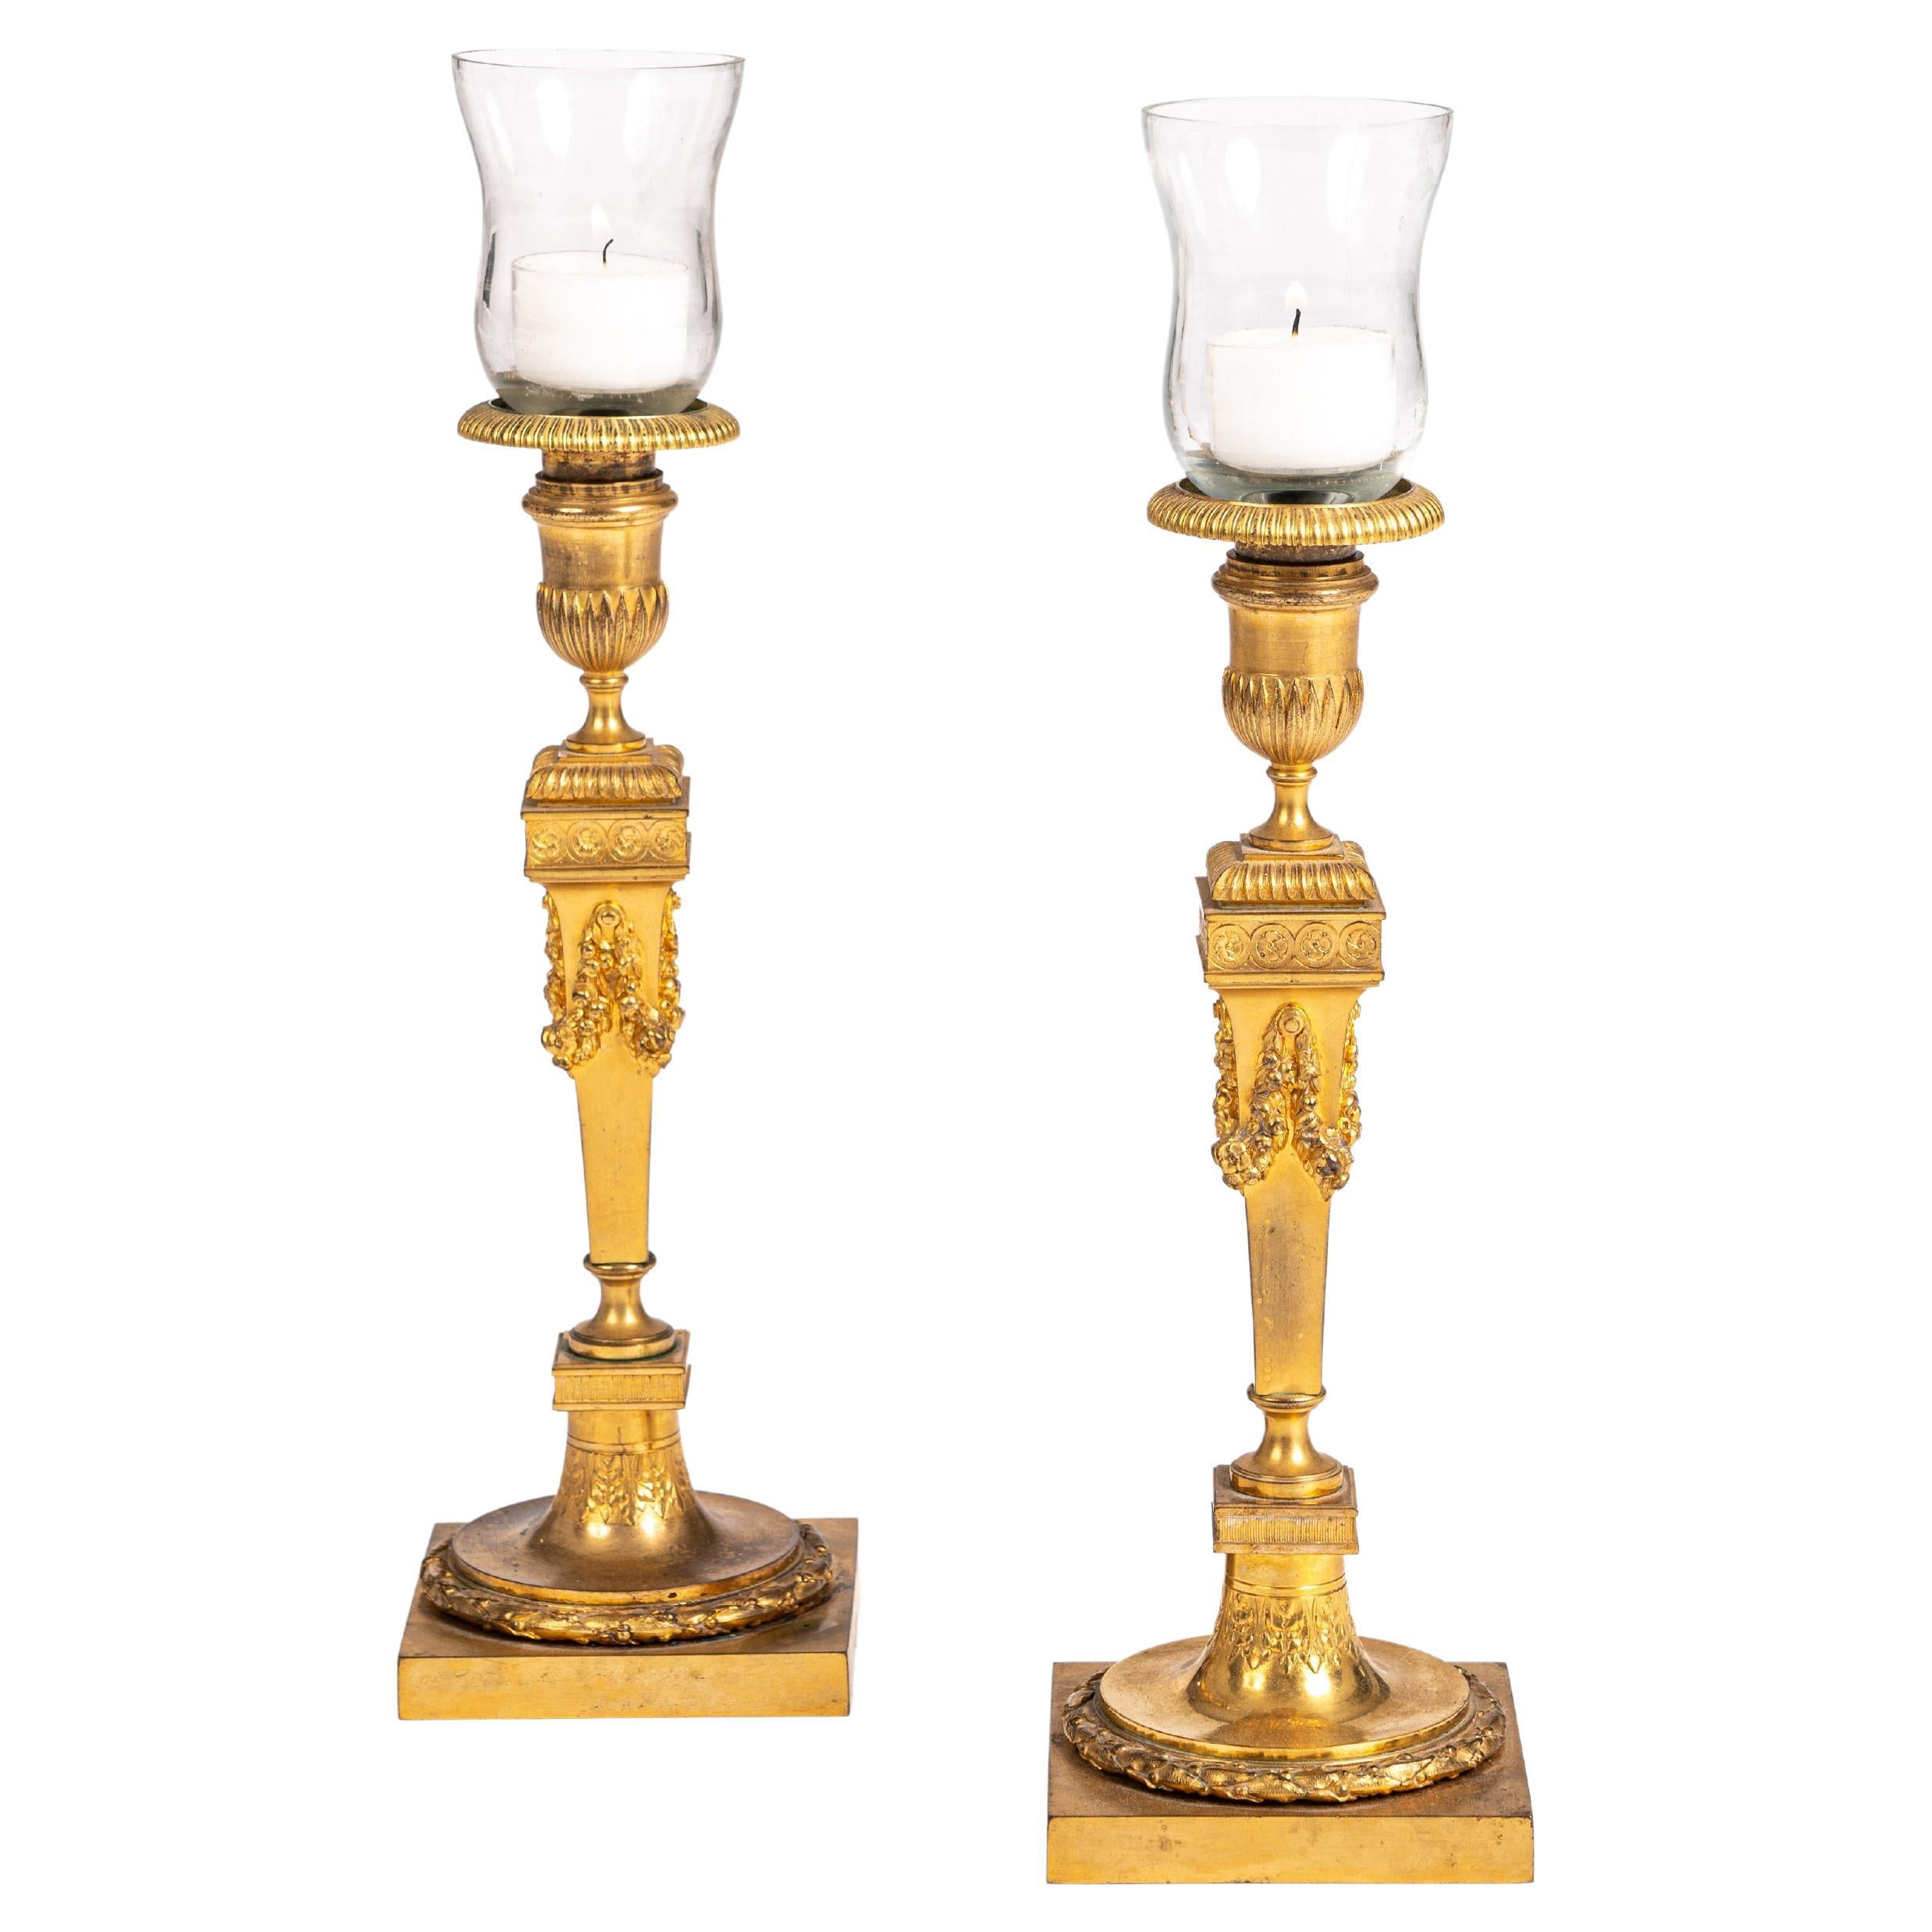 Pair of Classicistical Fire Gilded Candlesticks France 1840 by F. Barbedienne